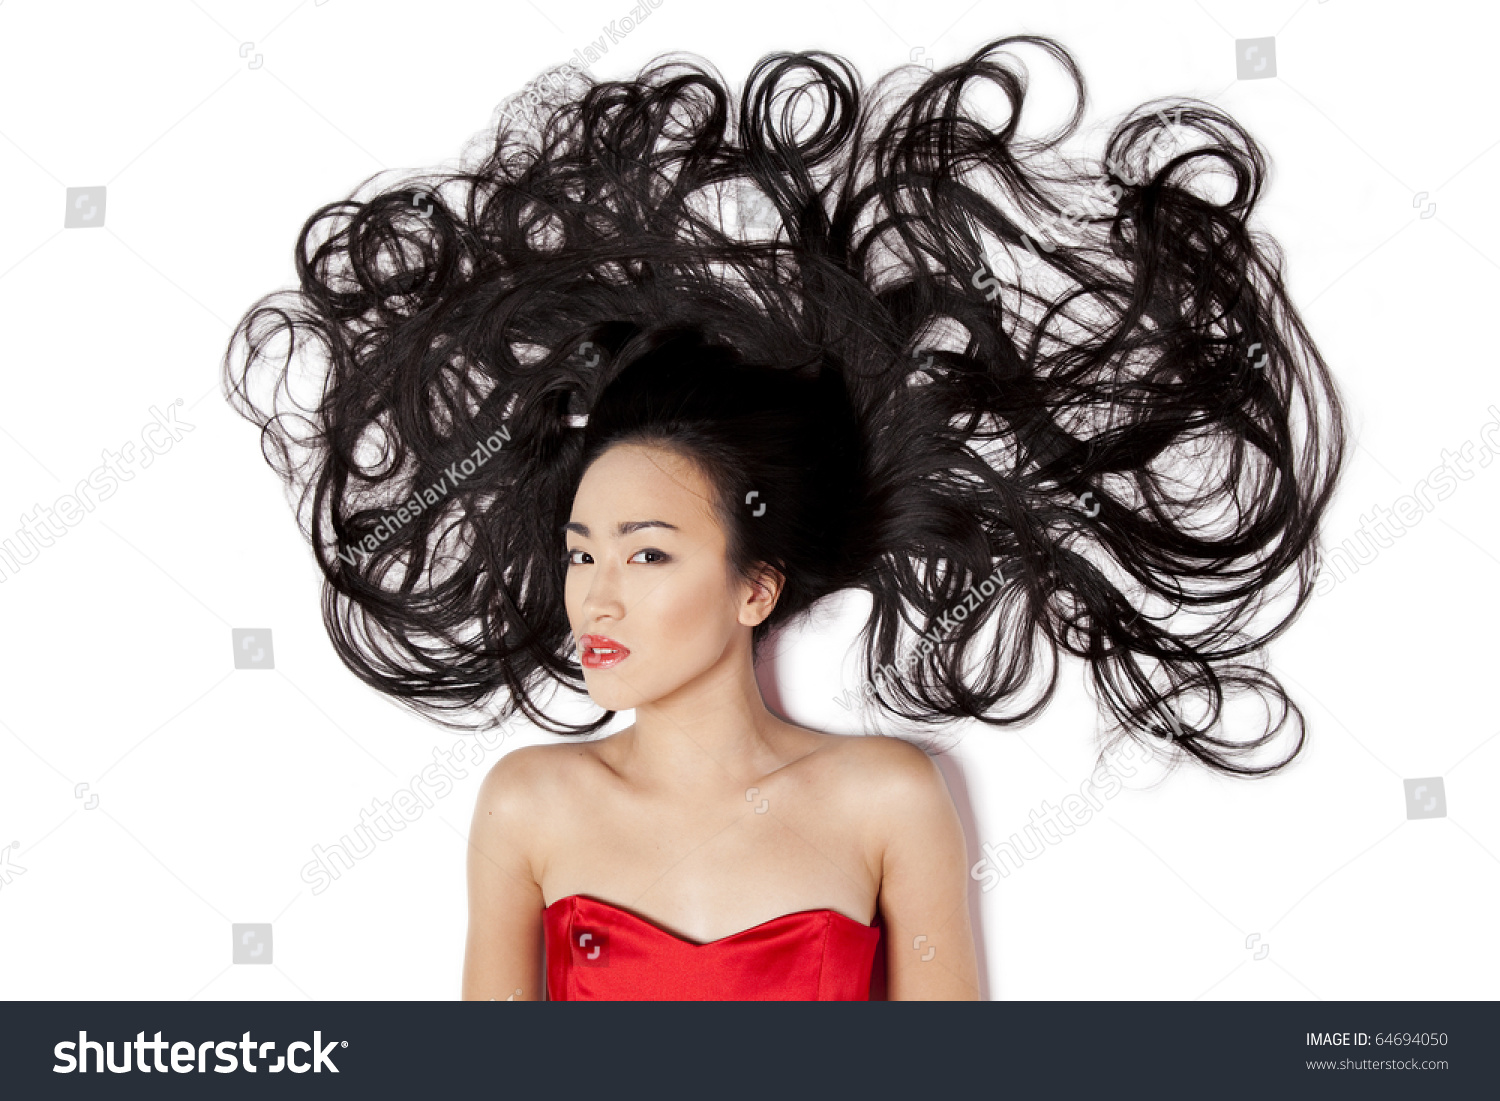 Beautiful Chinese Woman Lying Down On Stock Photo Edit Now 64694050